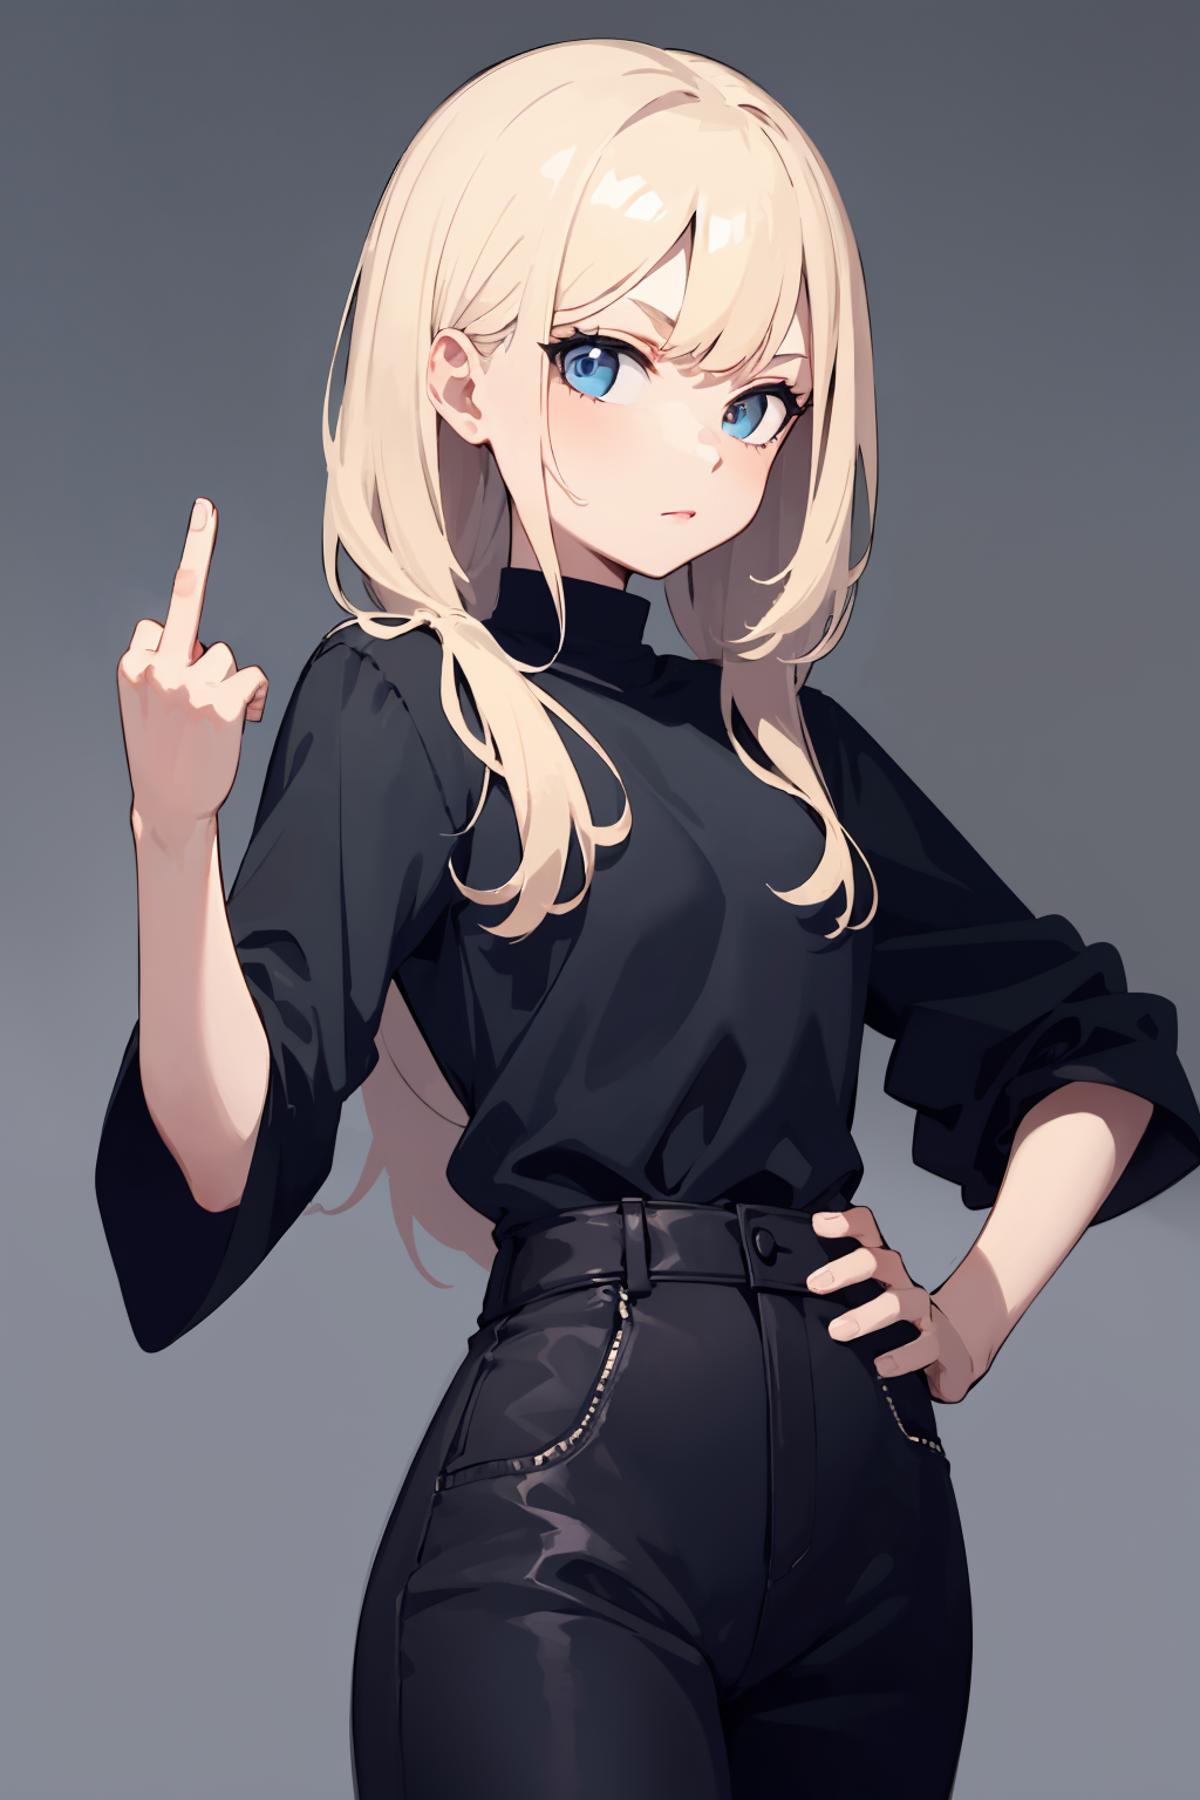 A cartoon drawing of a woman wearing black with blond hair making a middle finger gesture.